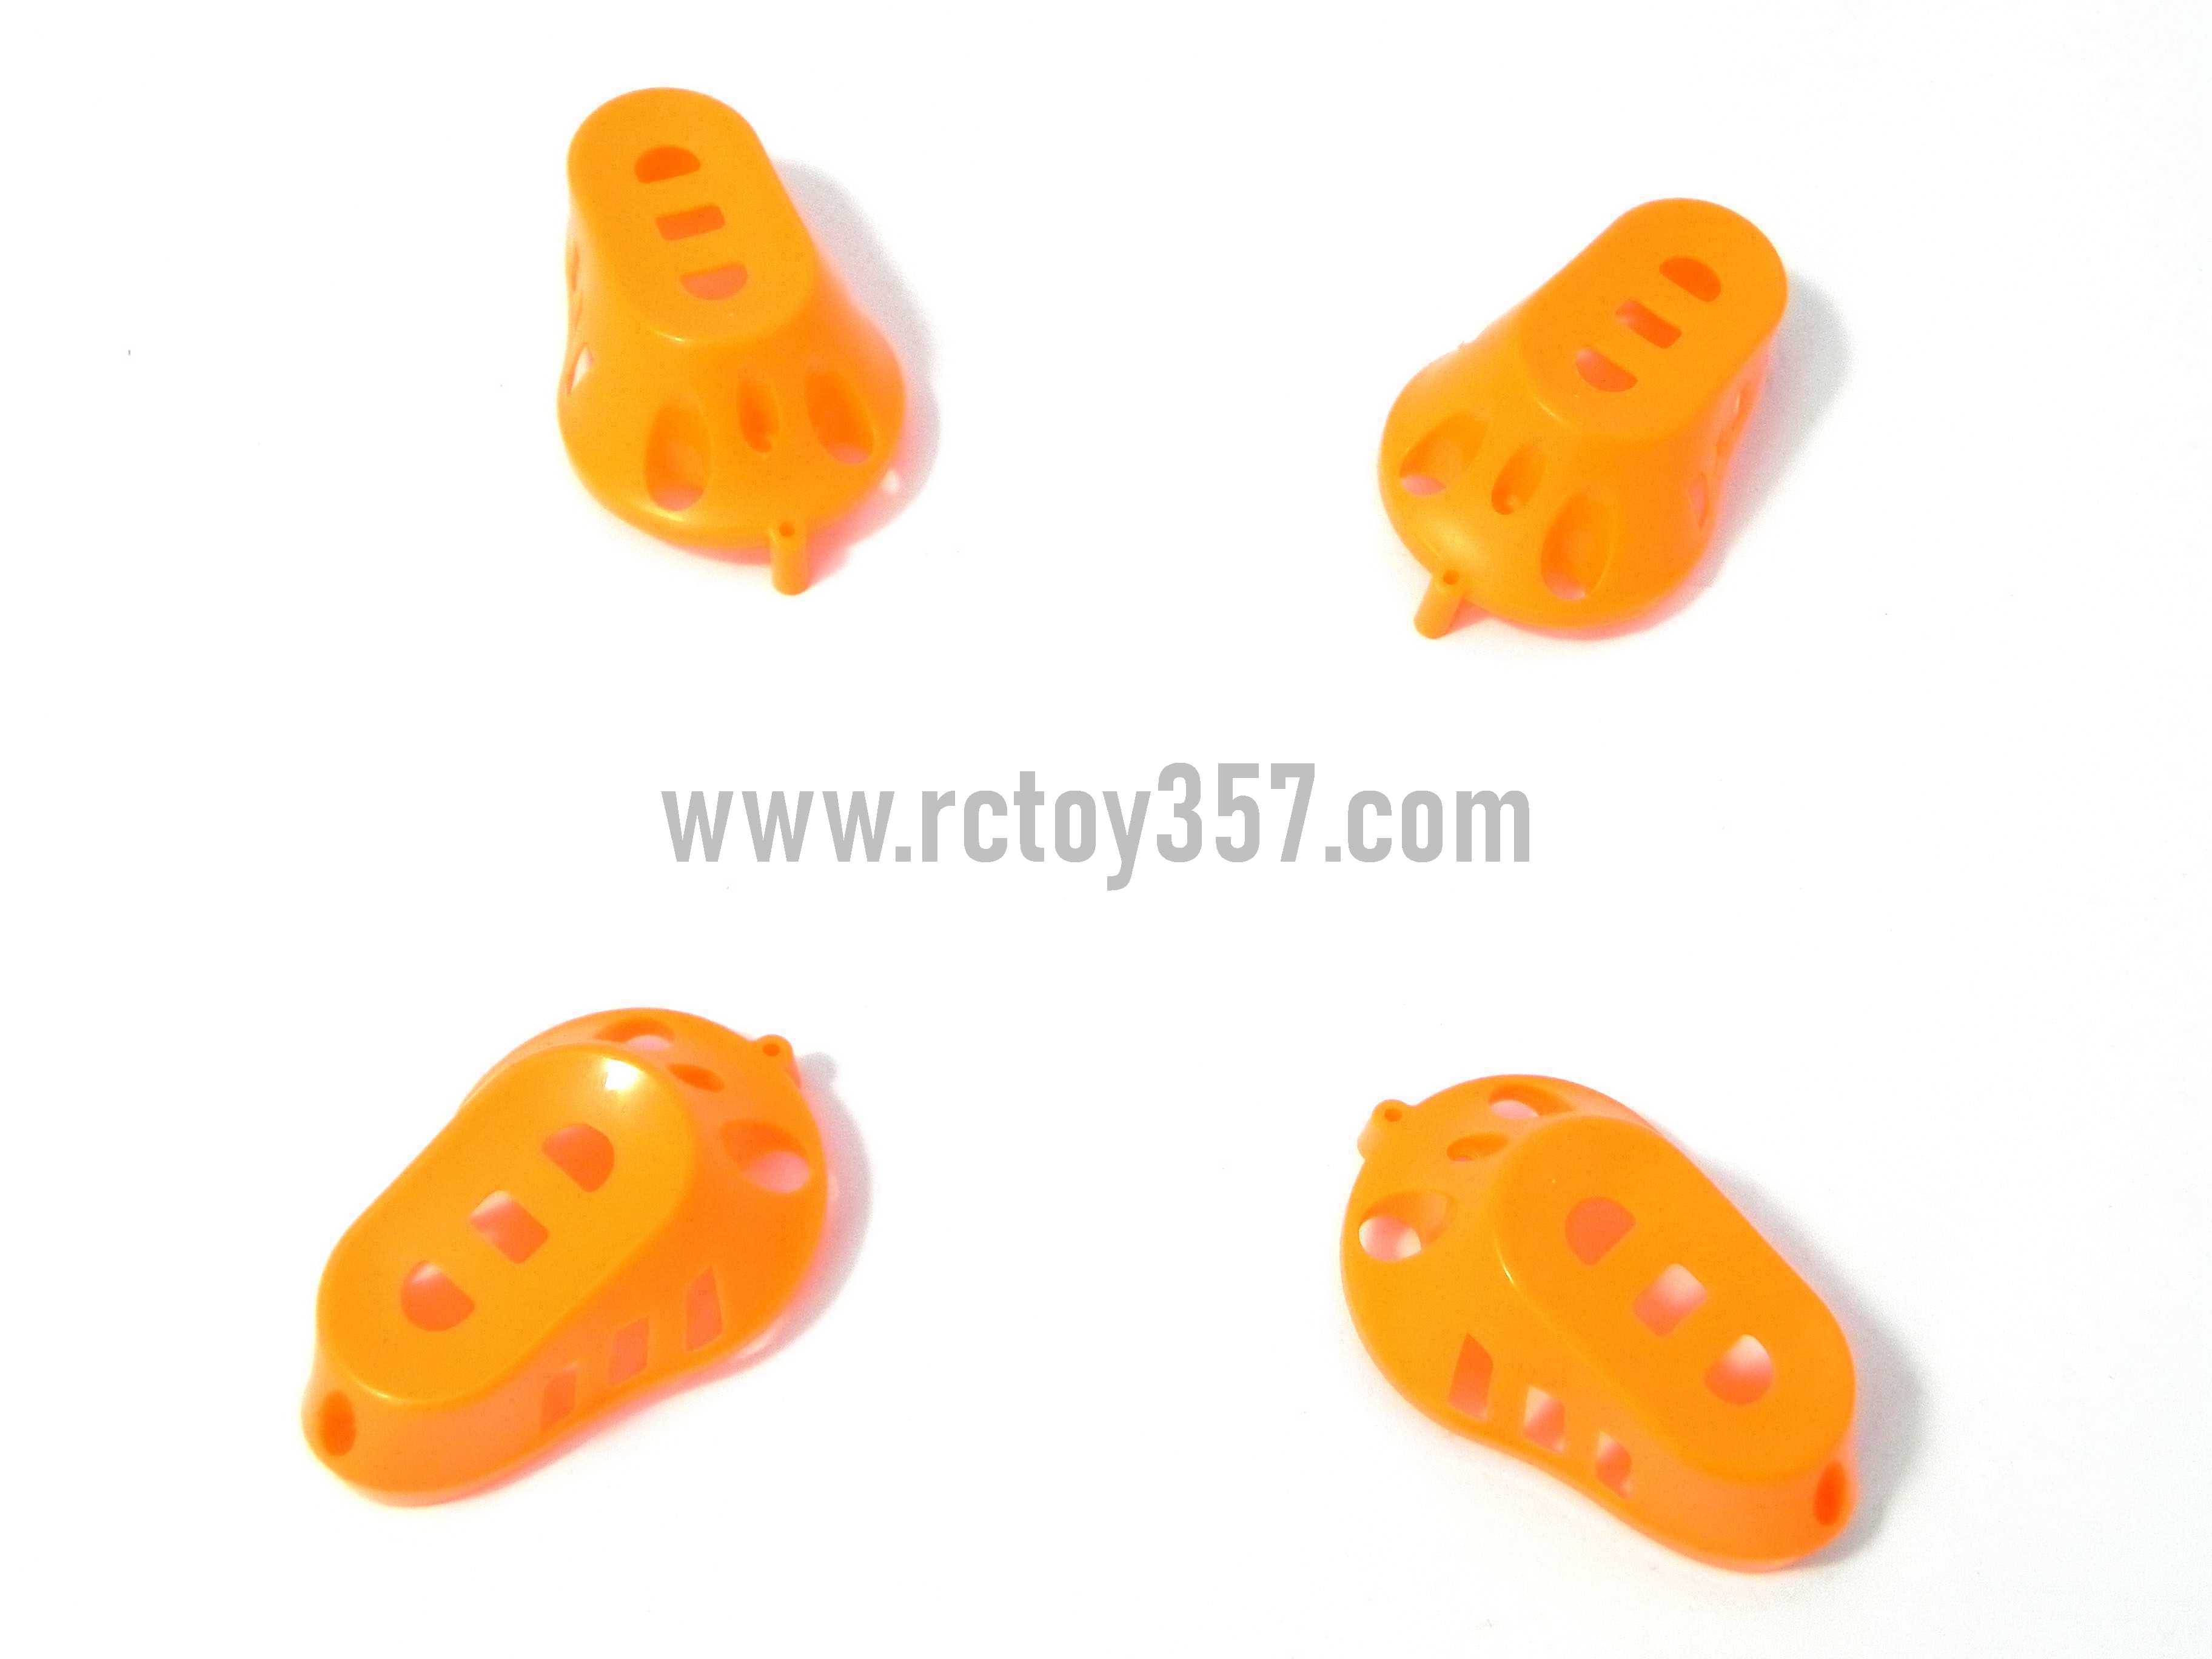 RCToy357.com - SYMA X8W Quadcopter toy Parts motor cover(yellow)